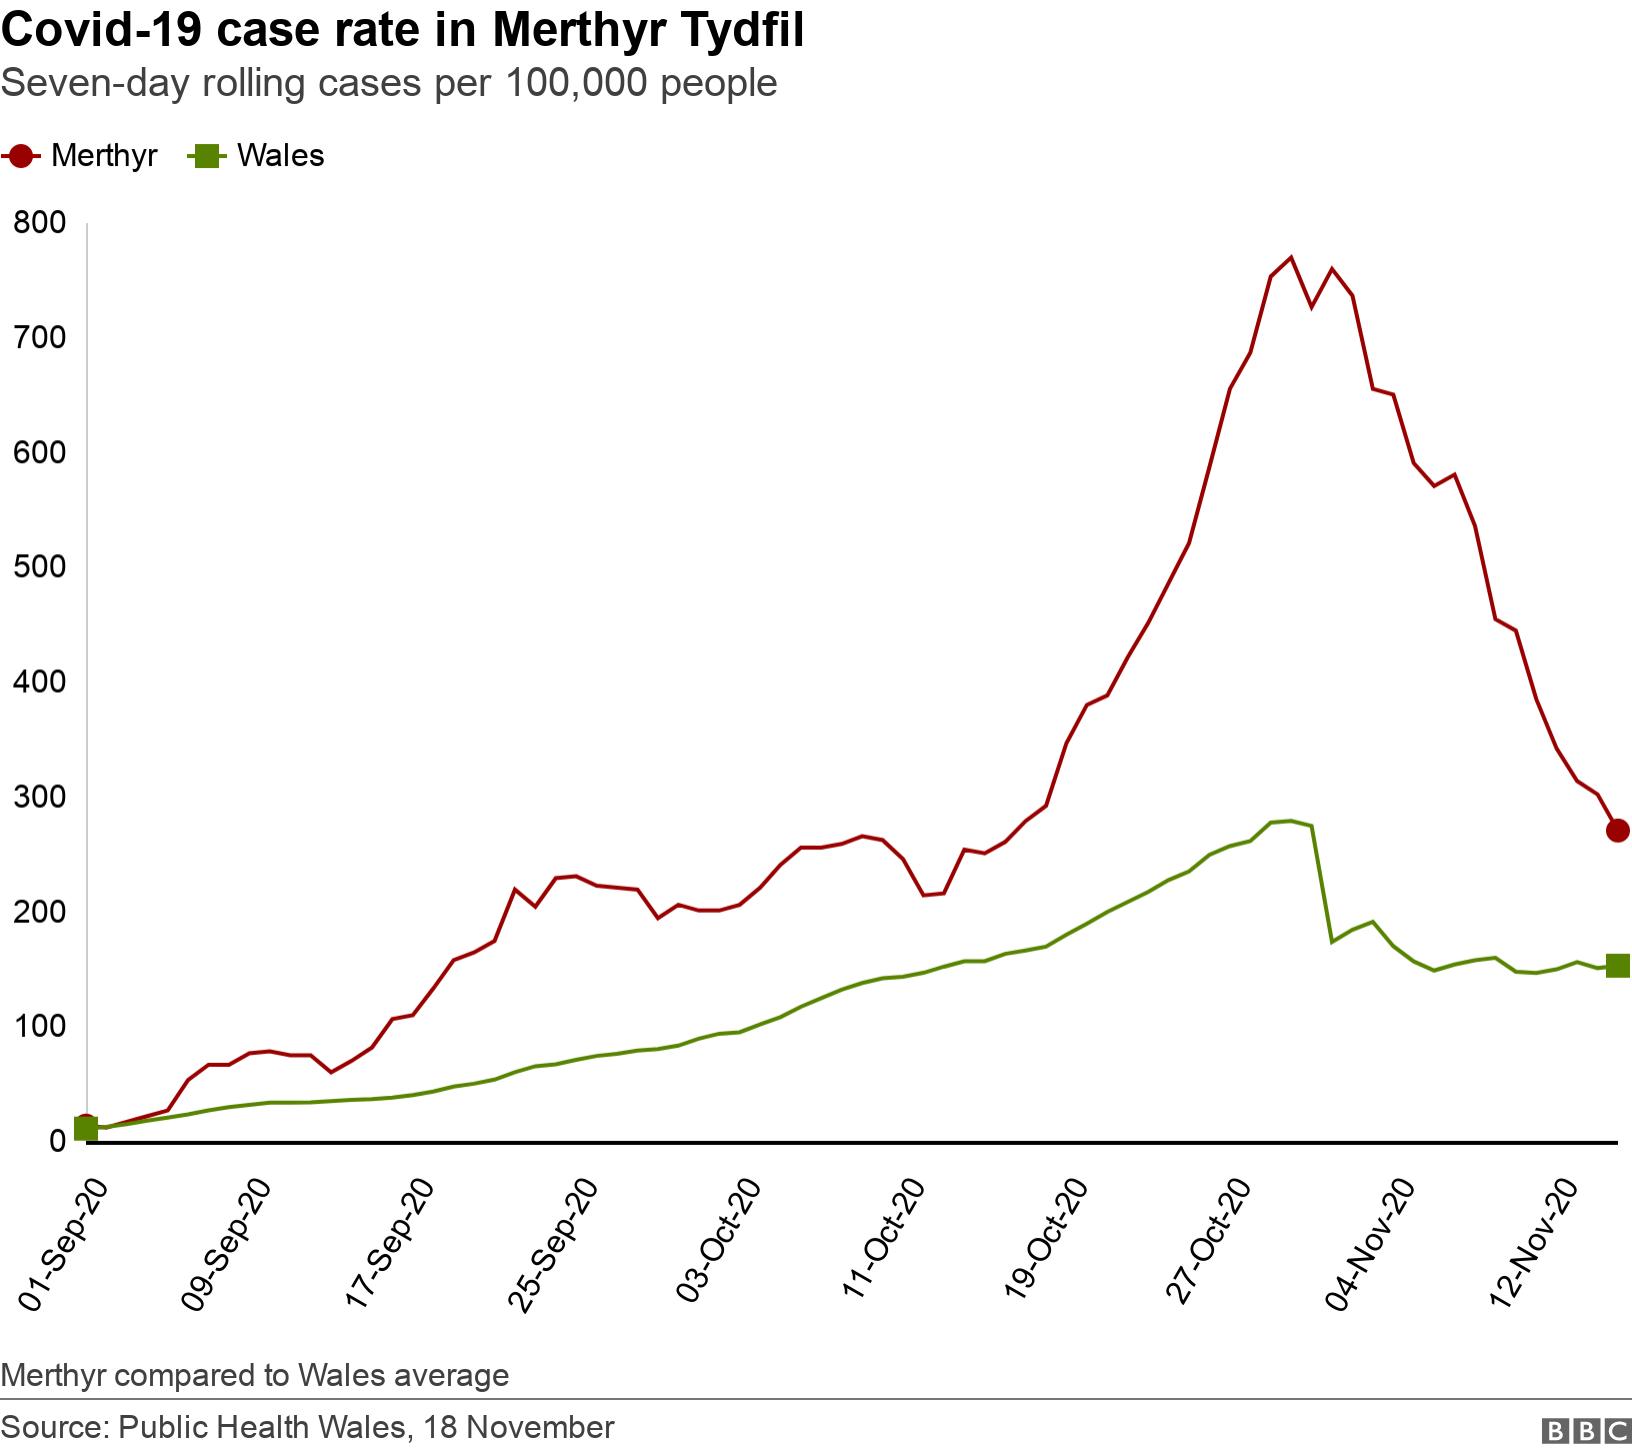 Covid-19 case rate in Merthyr Tydfil. Seven-day rolling cases per 100,000 people.  Merthyr compared to Wales average.